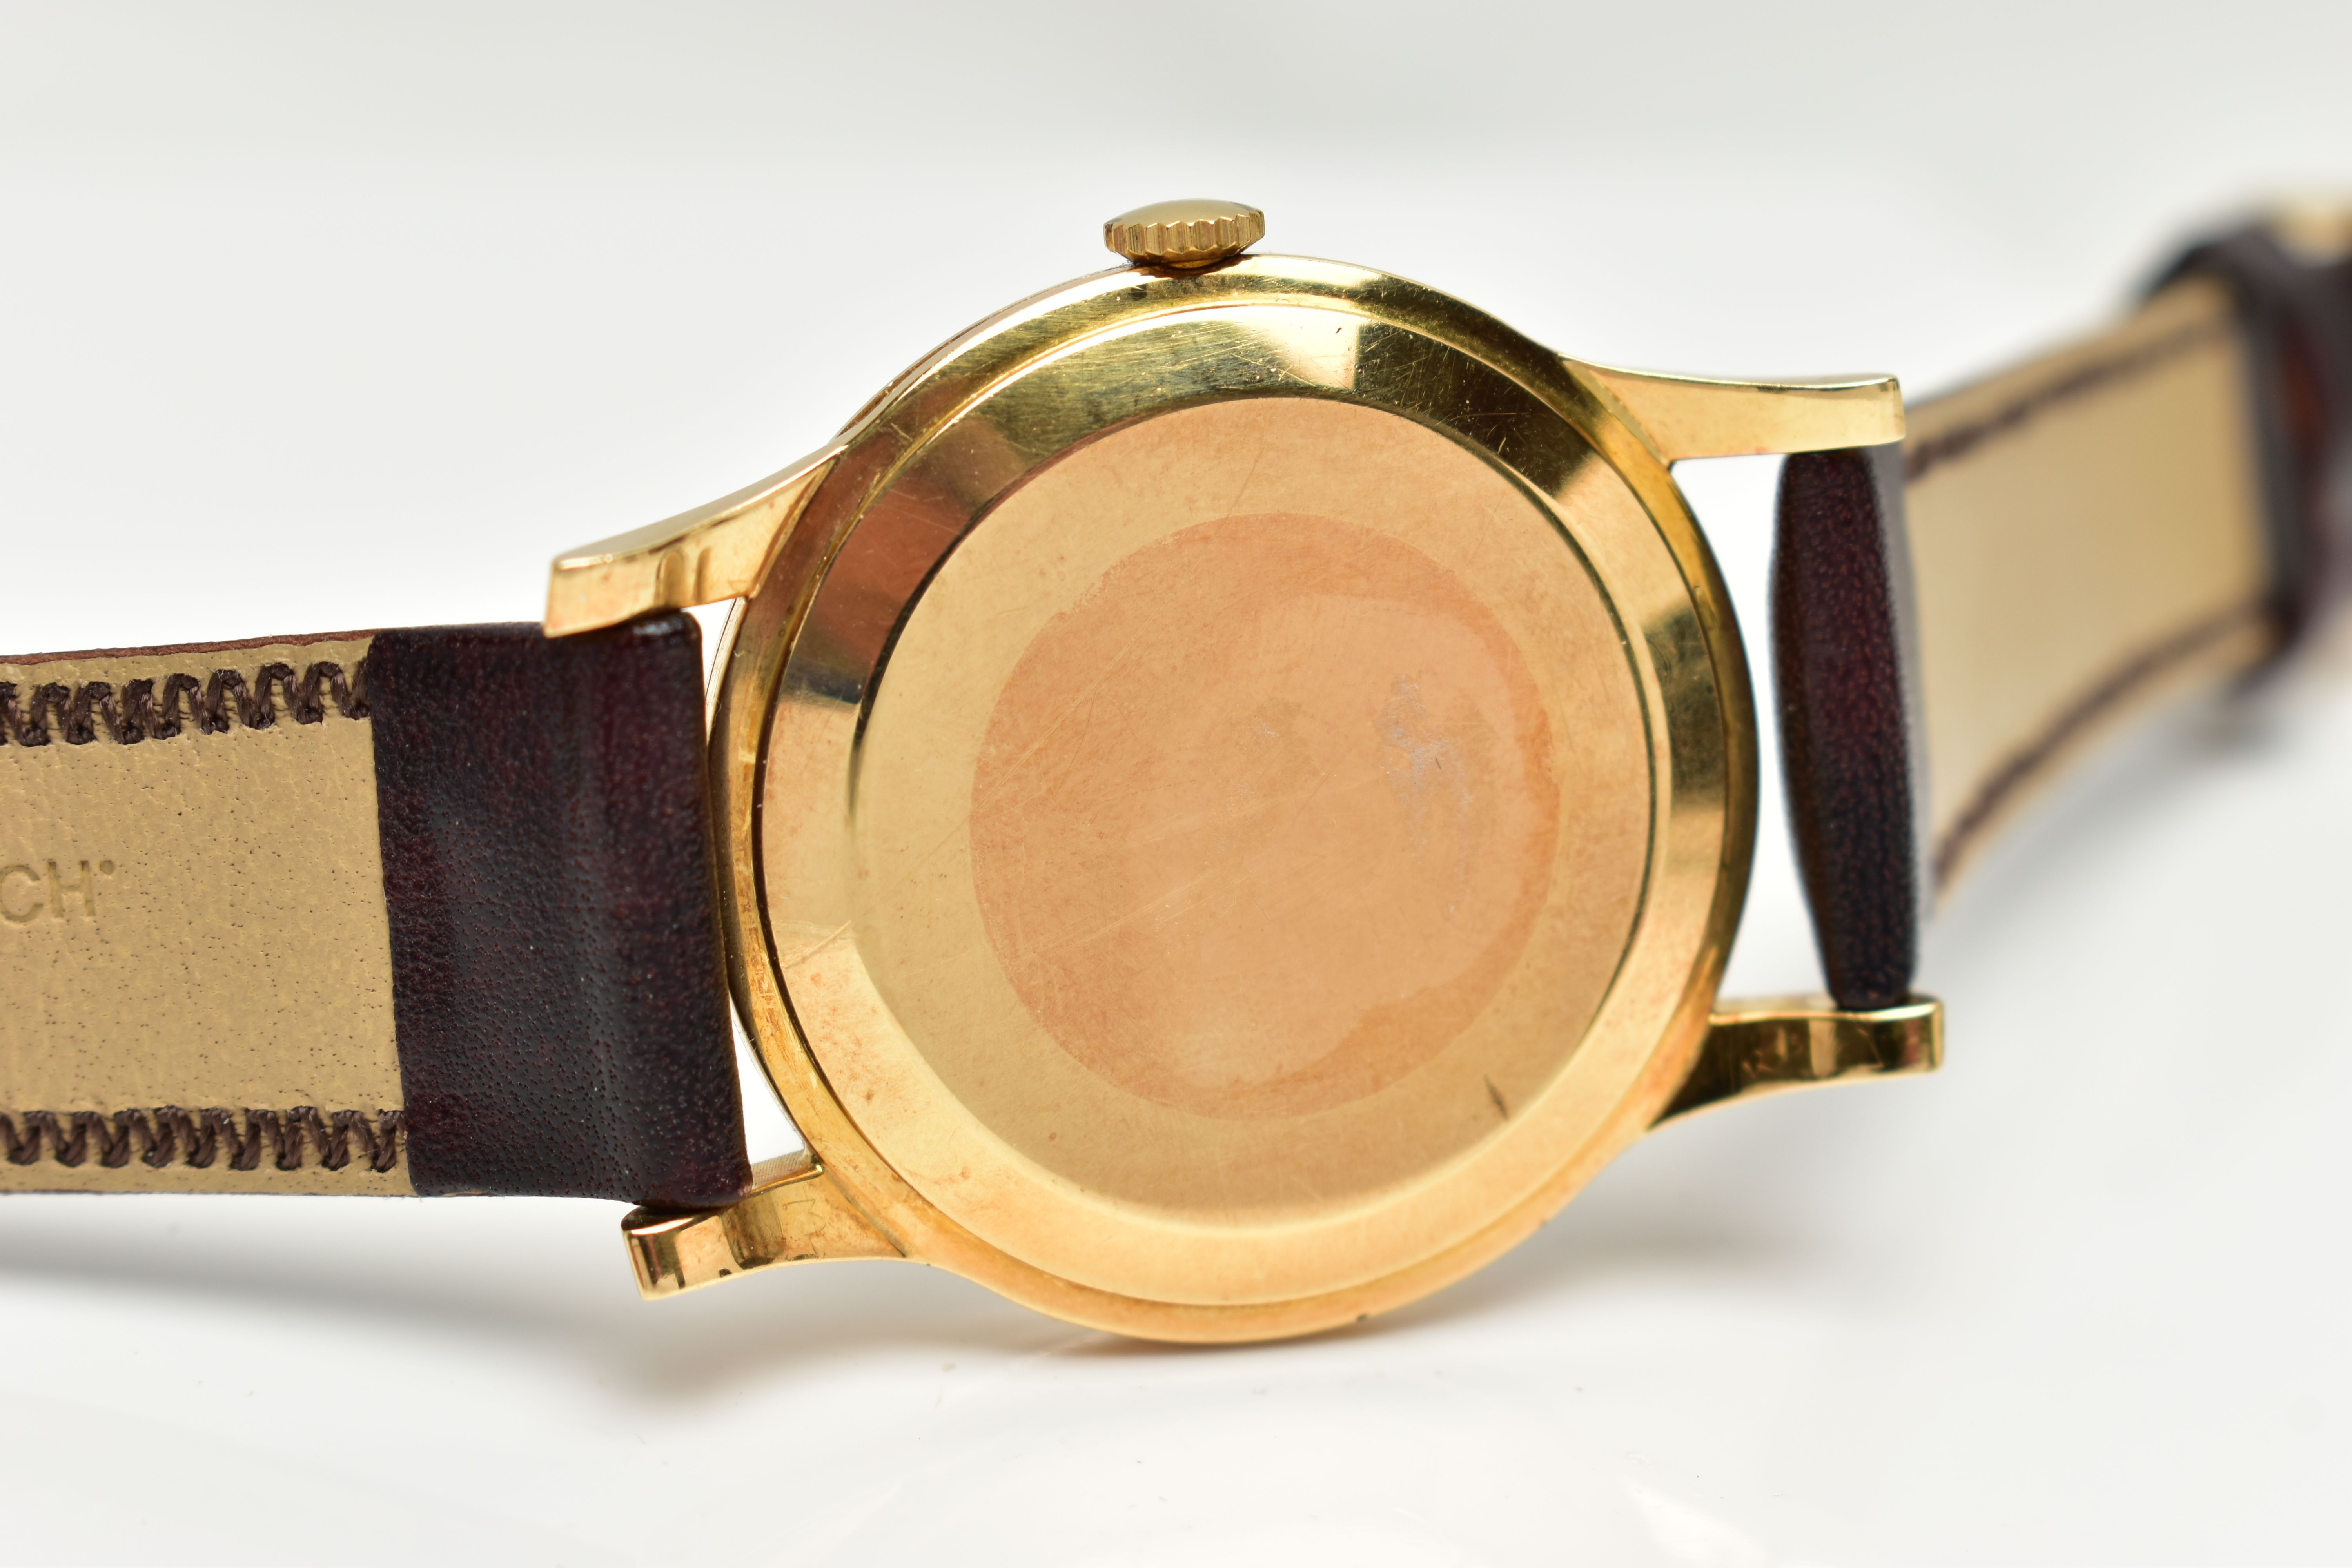 AN 18CT GOLD GENTS 'ROLEX, PRECISION' WRISTWATCH, hand wound movement, round dial, signed 'Rolex' - Image 6 of 7